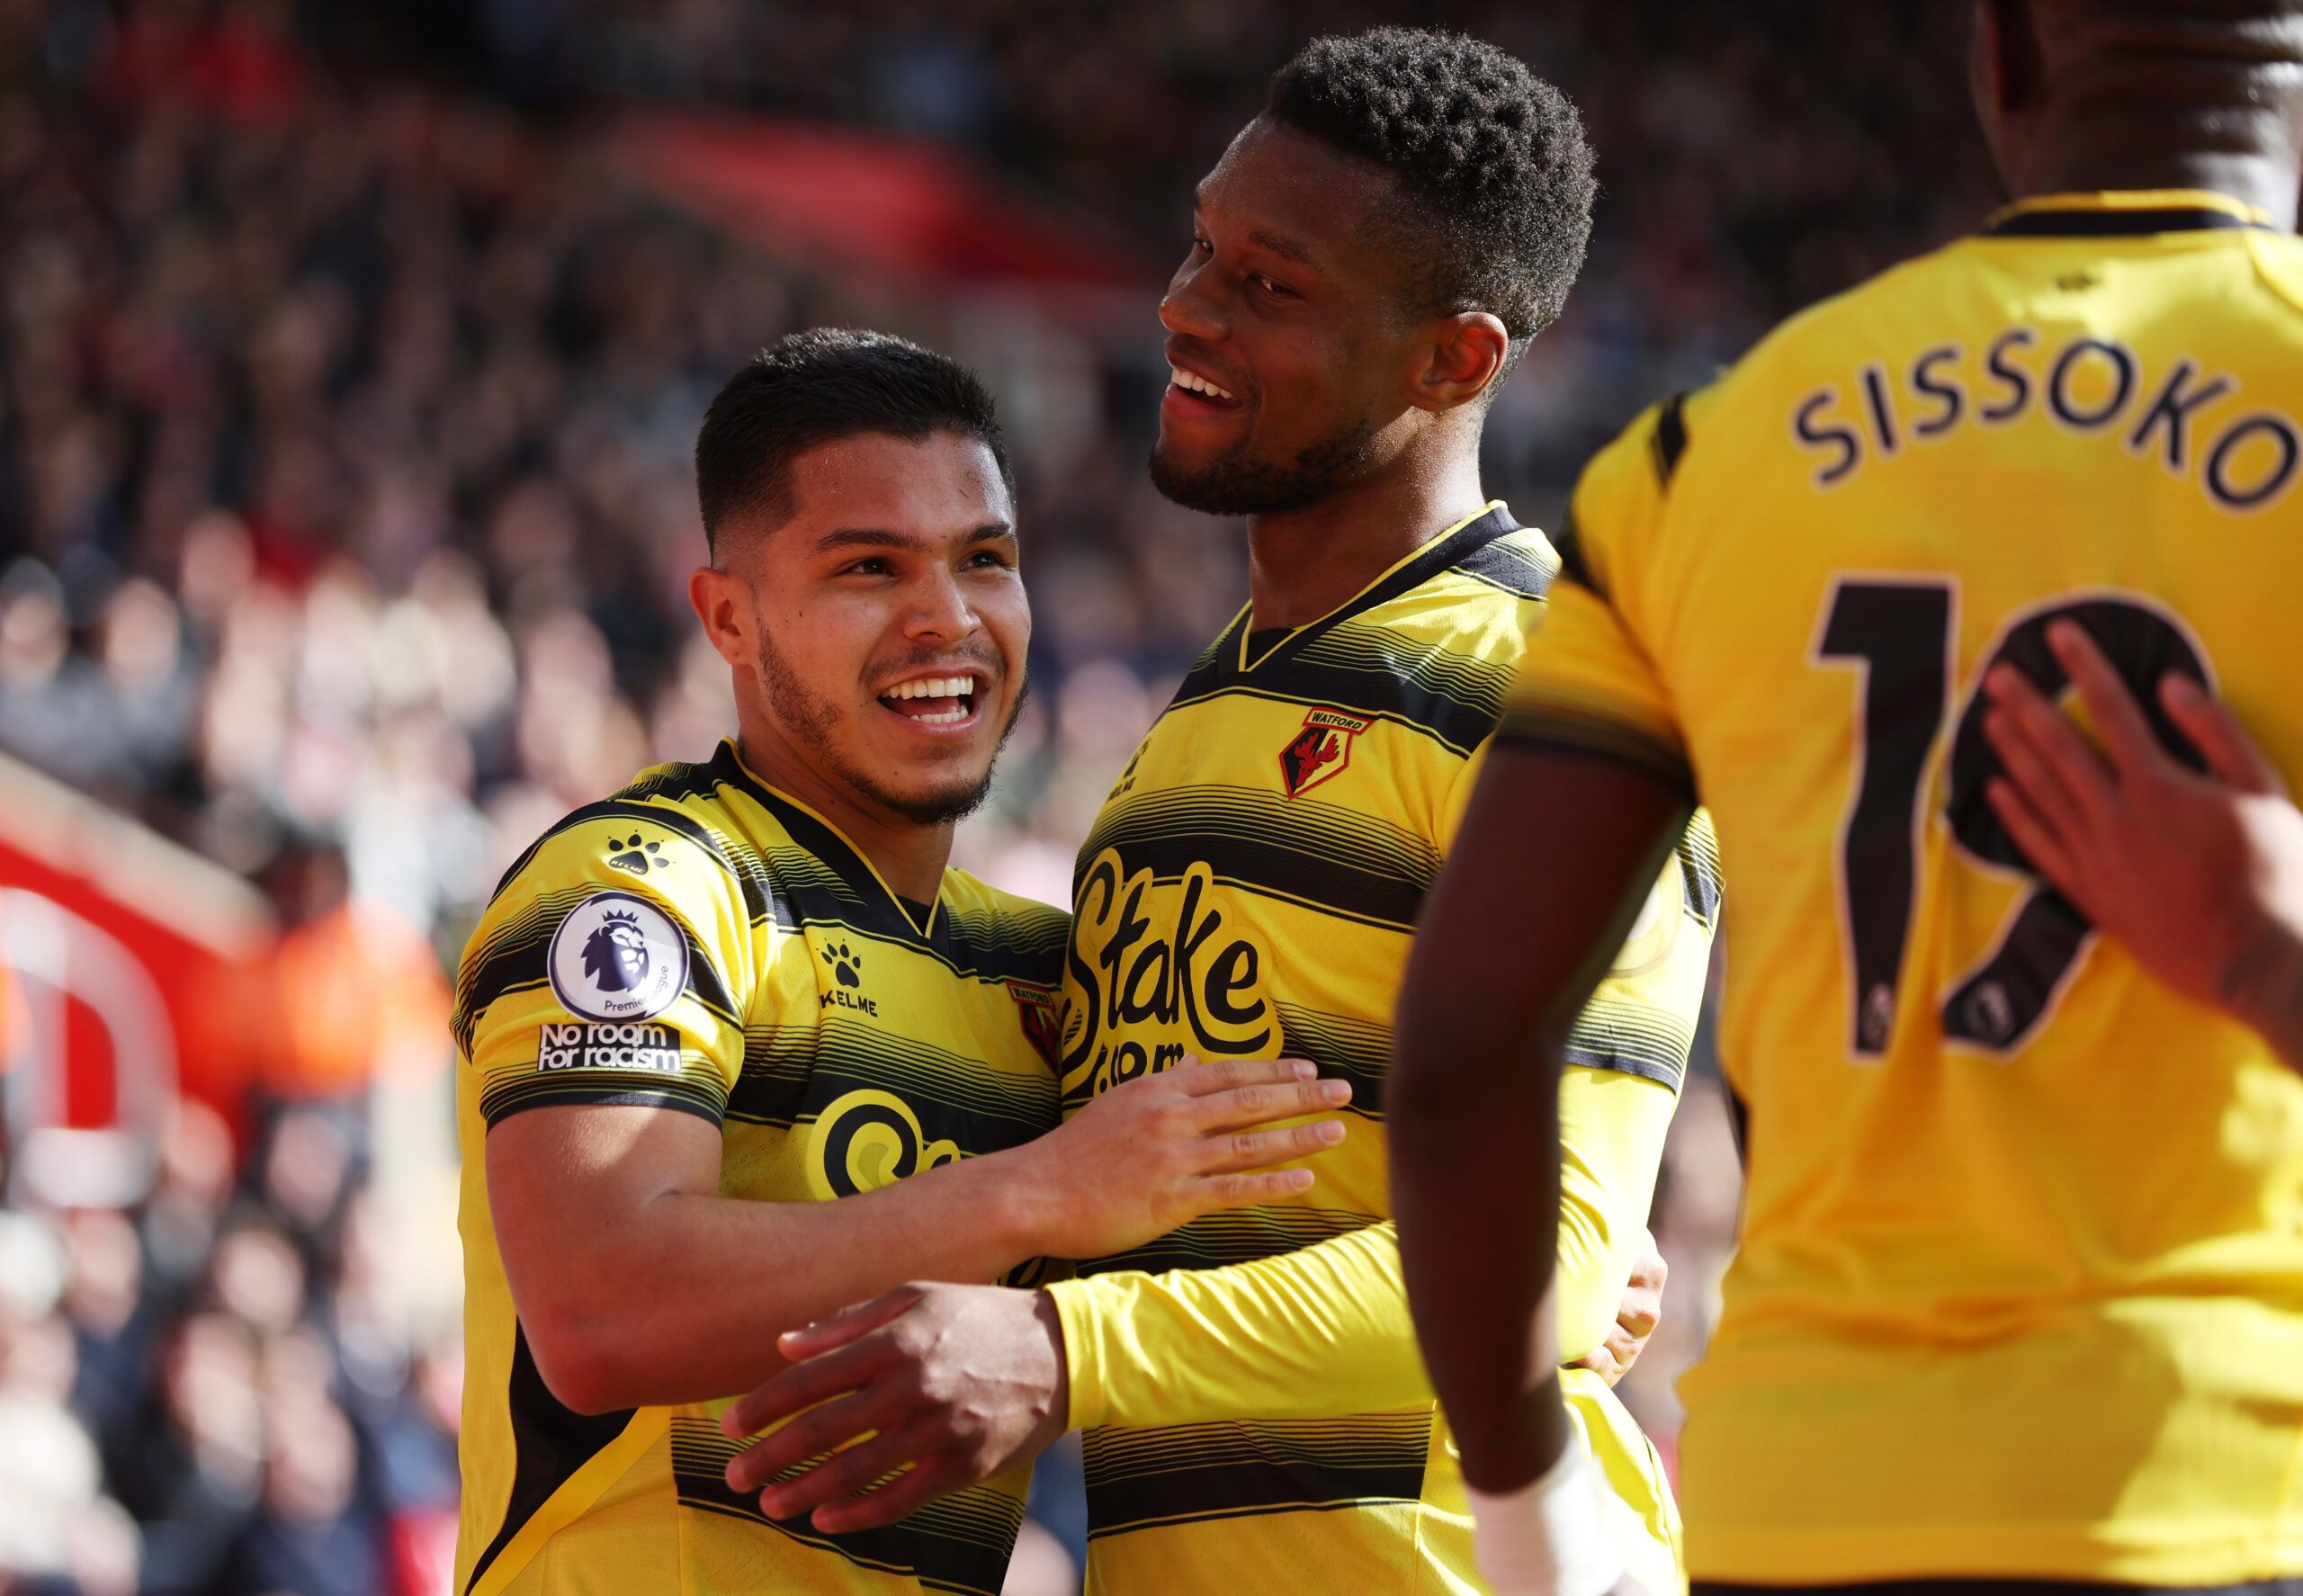 Soccer Football - Premier League - Southampton v Watford - St Mary's Stadium, Southampton, Britain - March 13, 2022 Watford's Cucho Hernandez celebrates scoring their second goal Christian Kabasele Action Images via Reuters/Paul Childs EDITORIAL USE ONLY. No use with unauthorized audio, video, data, fixture lists, club/league logos or 'live' services. Online in-match use limited to 75 images, no video emulation. No use in betting, games or single club /league/player publications.  Please contact